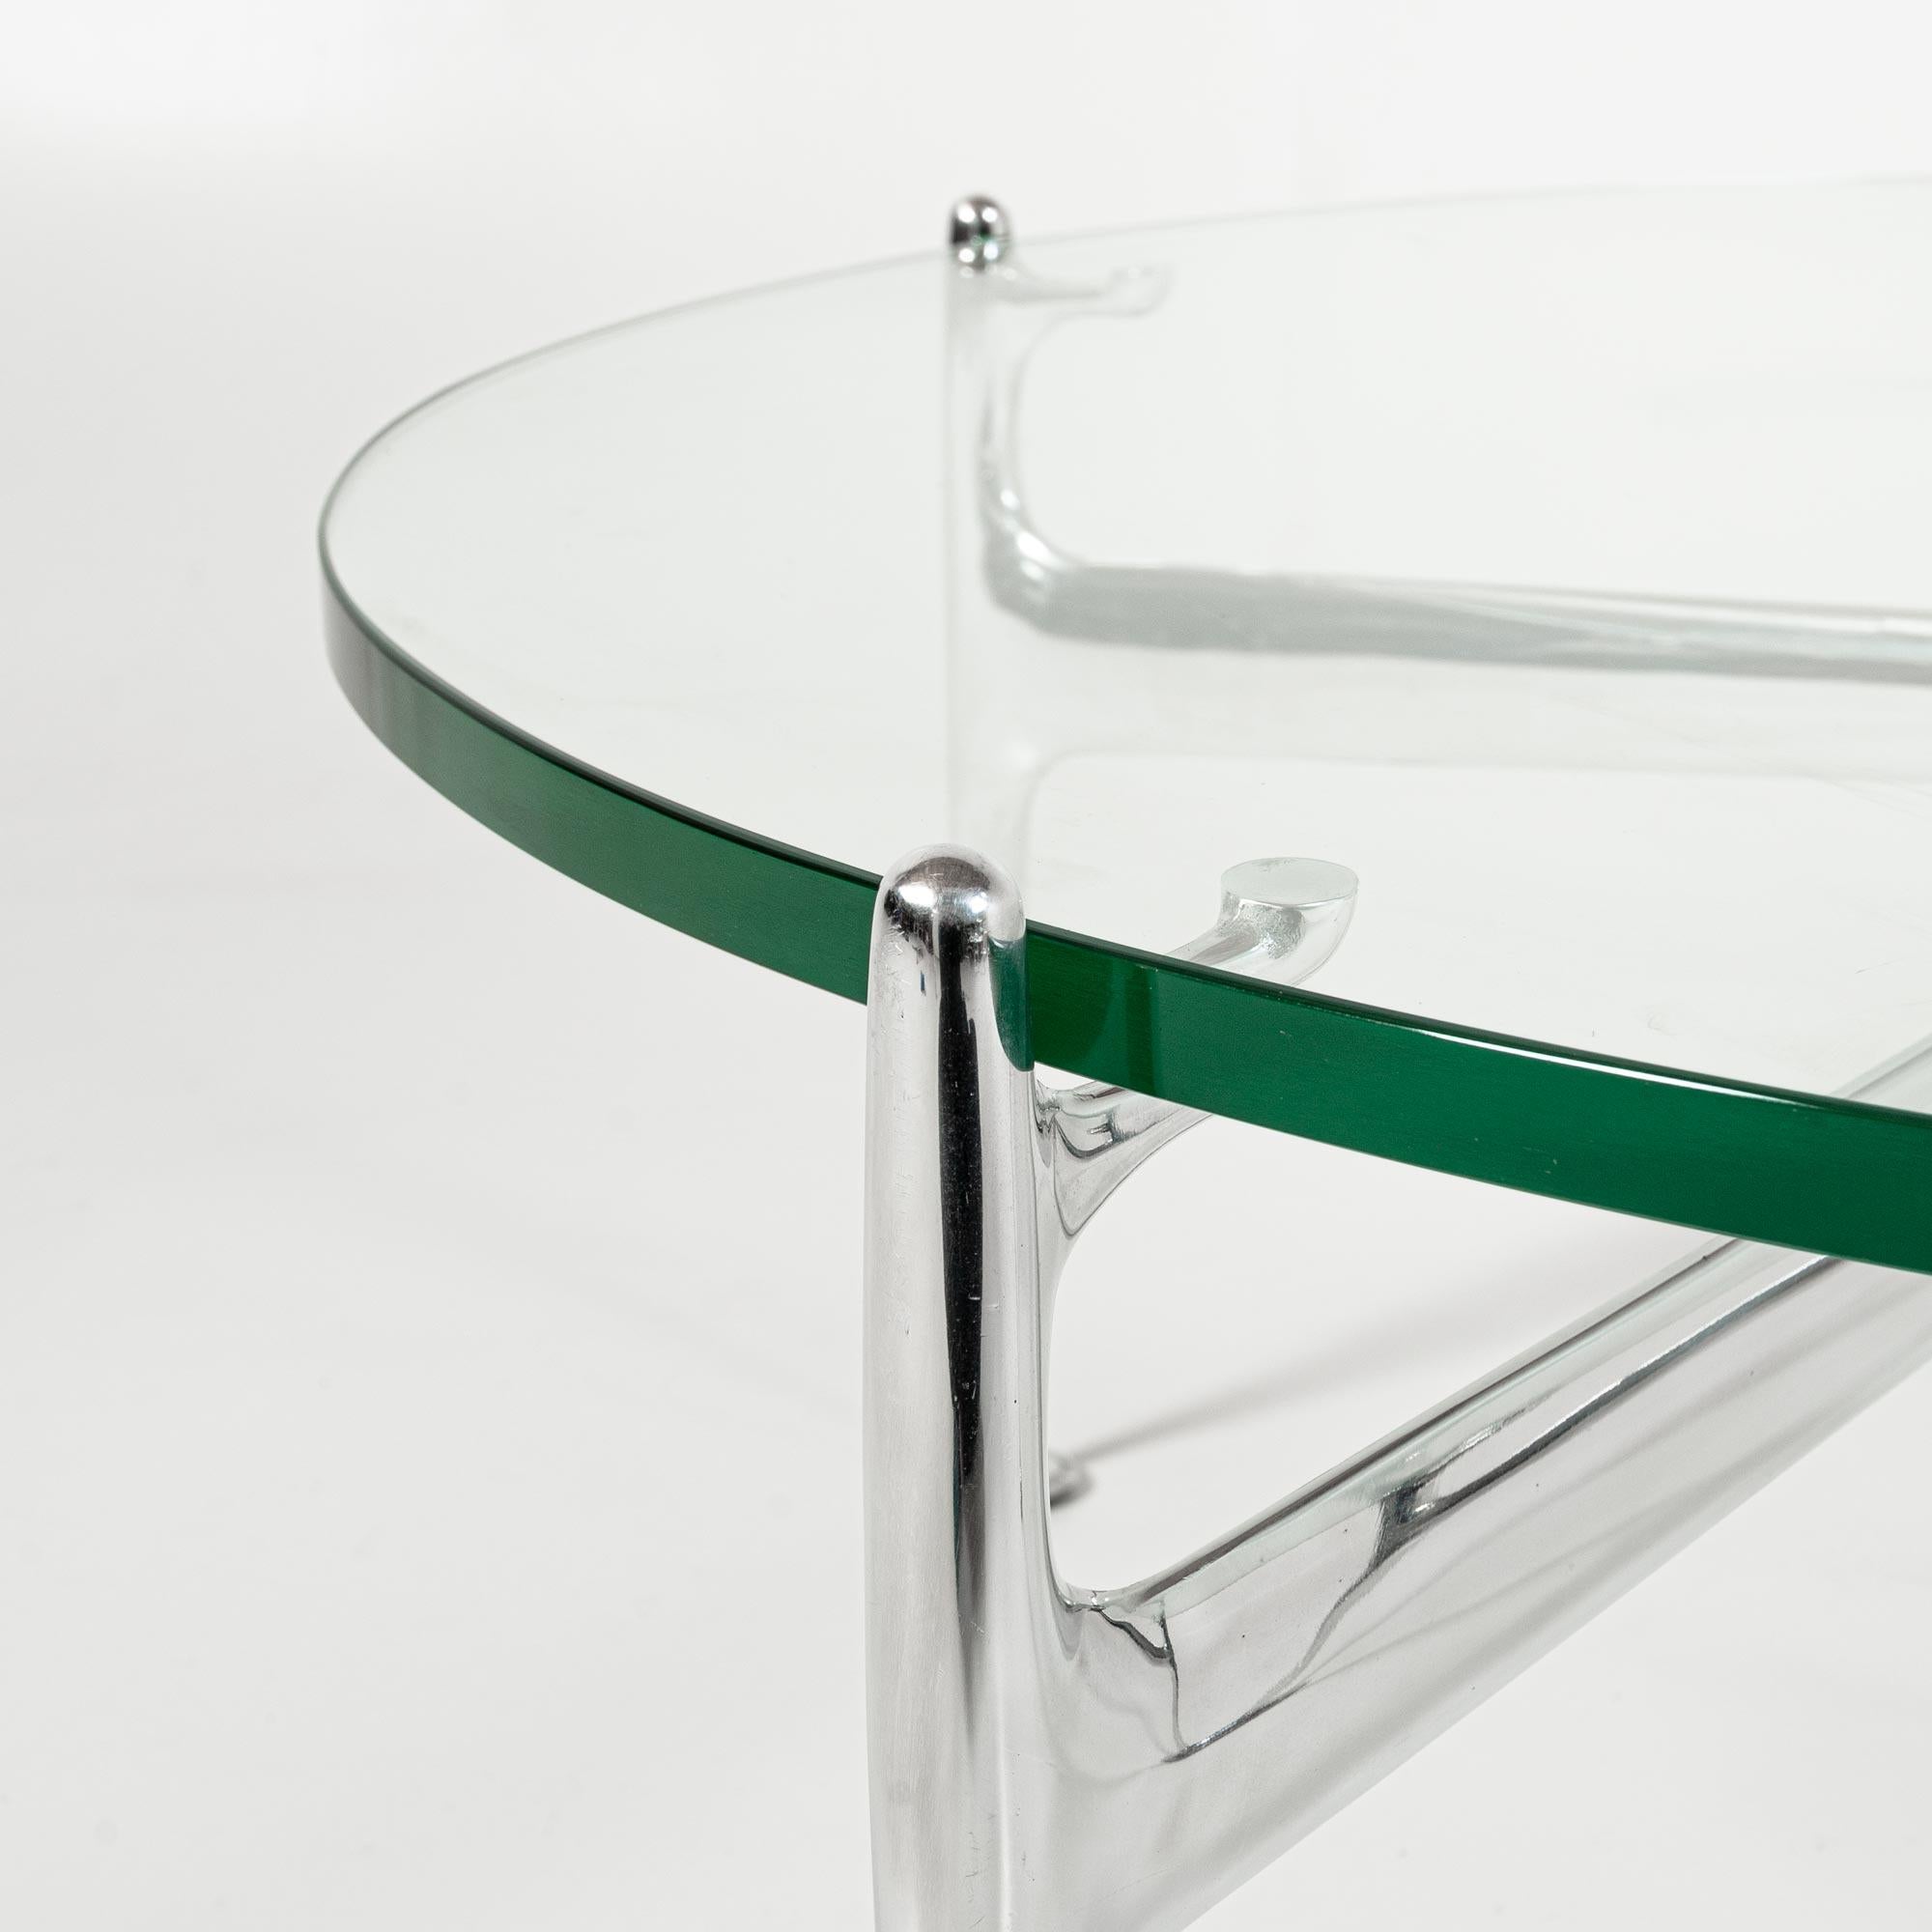 1965 Alexander Girard for Braniff Airlines & Herman Miller Glass Coffee Table For Sale 1